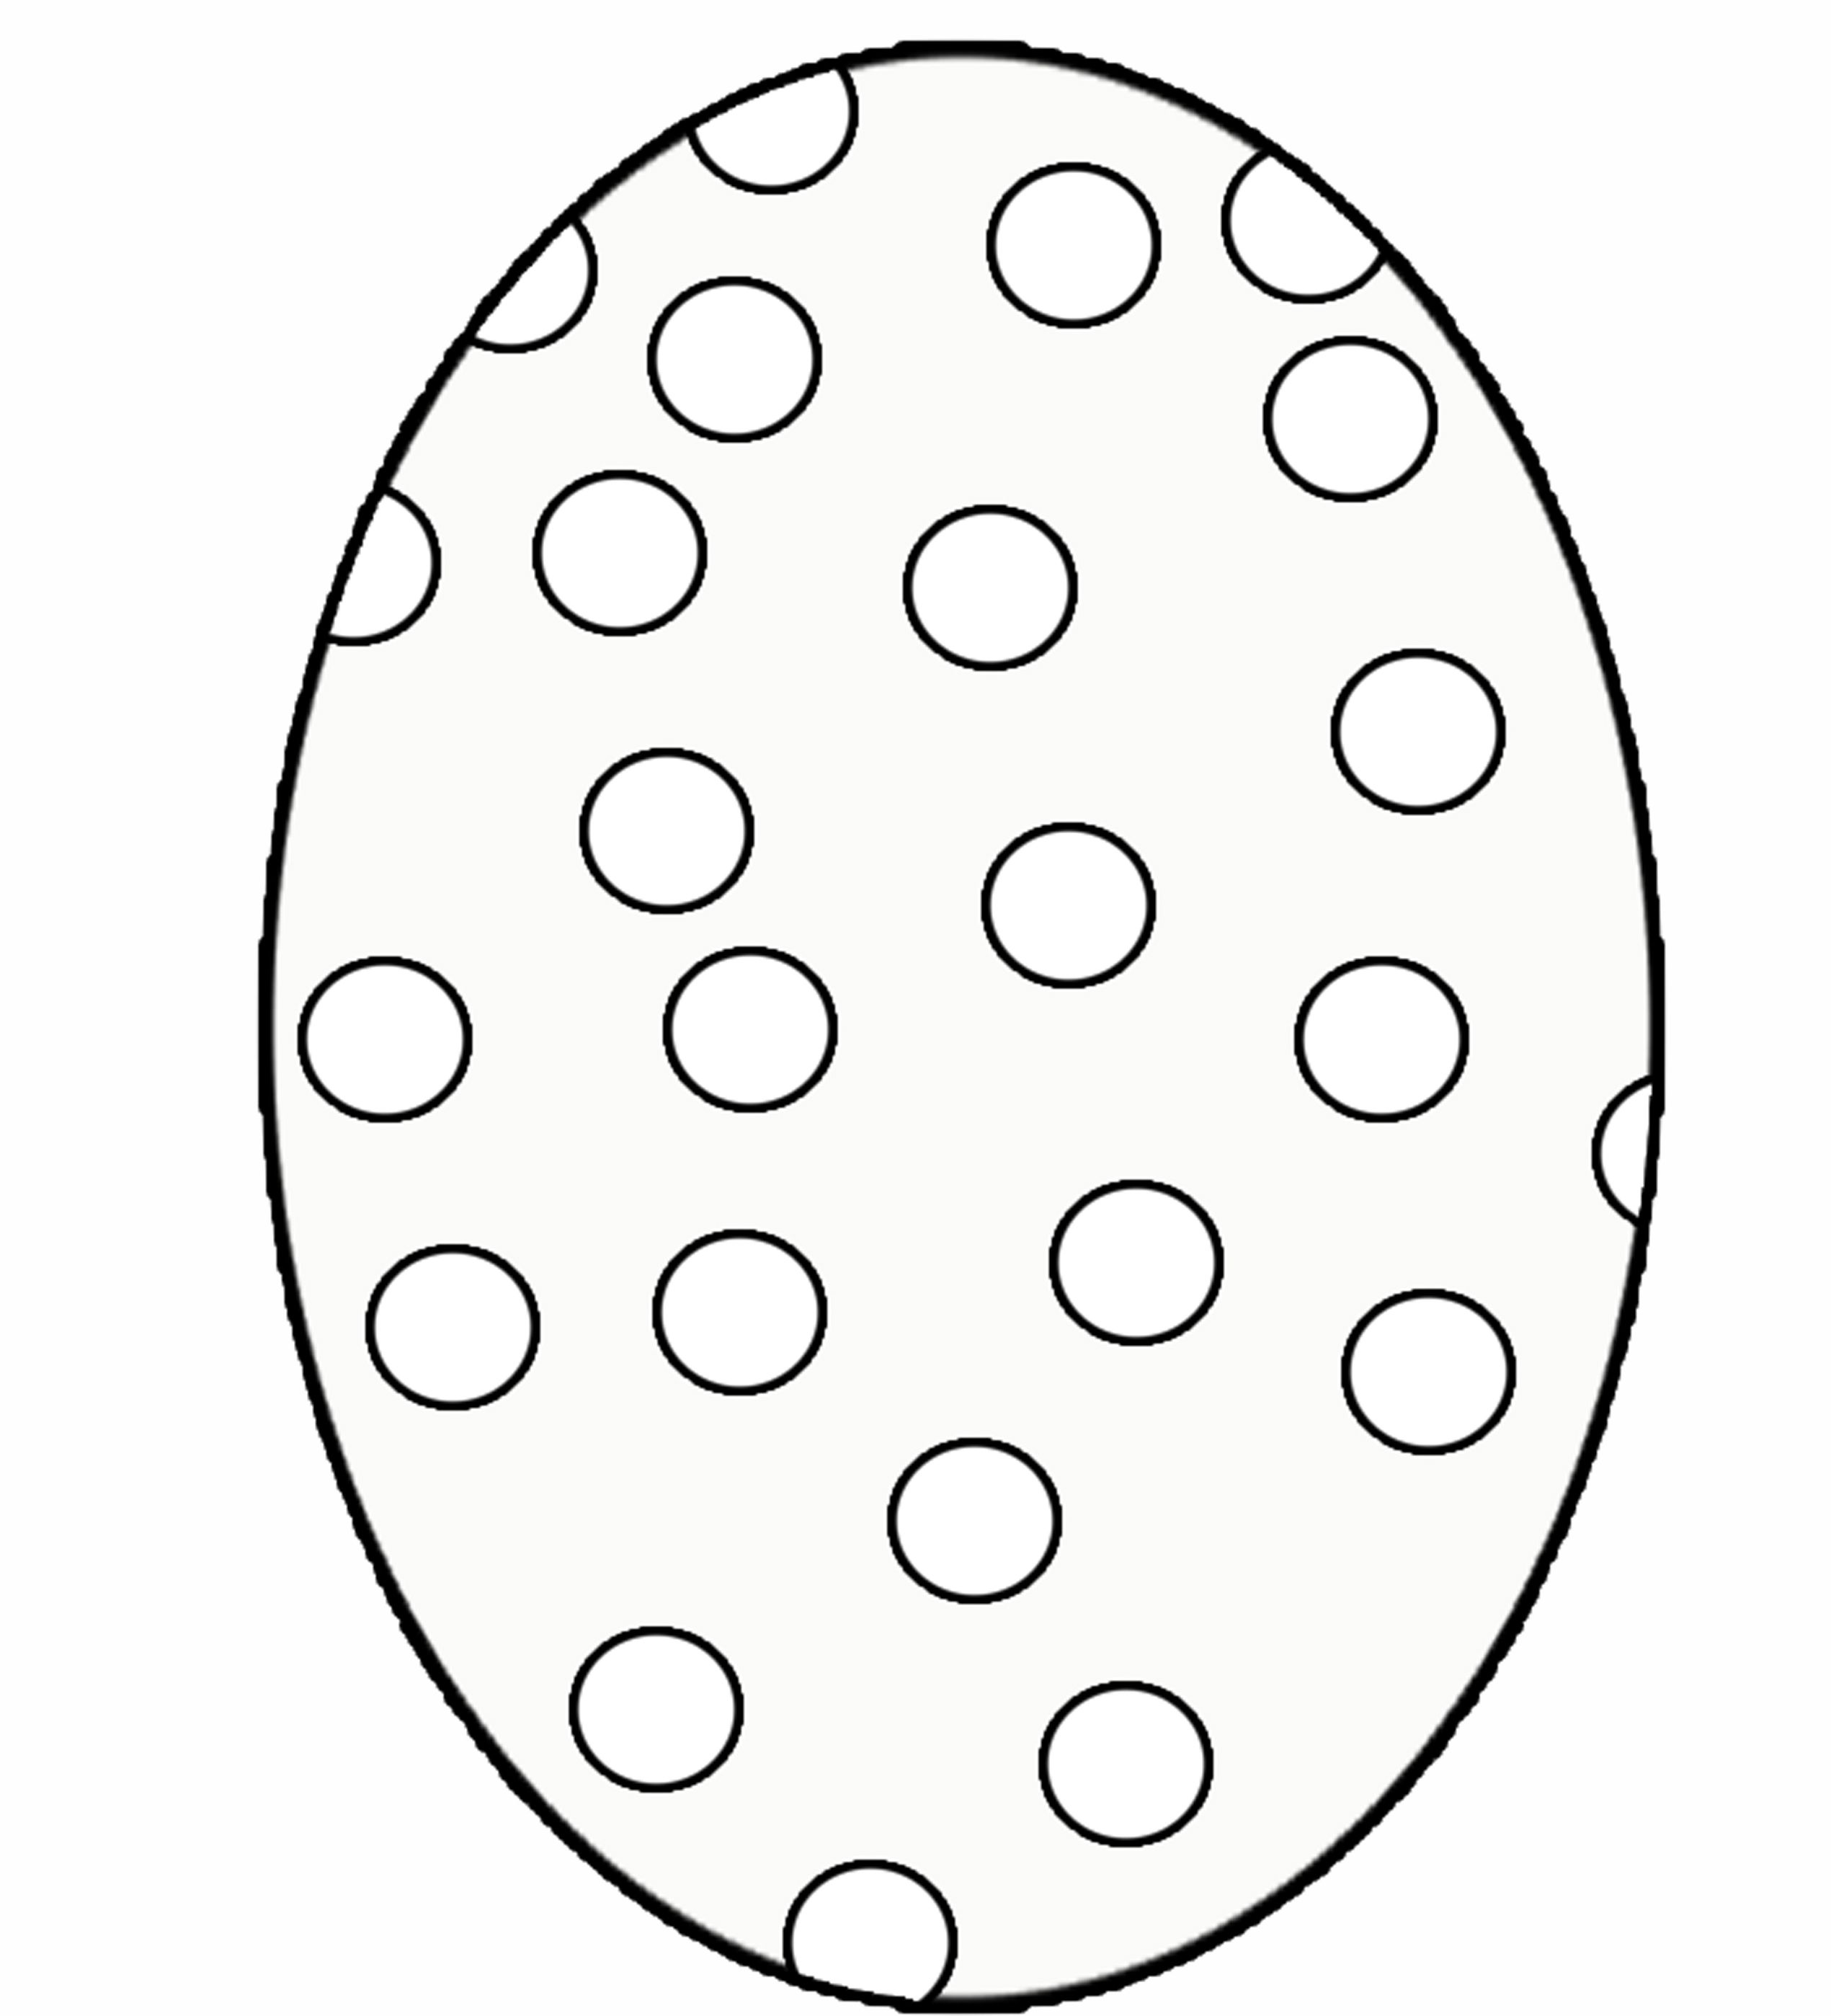 Easter Egg Coloring Pages 2016- Z31 Coloring Page